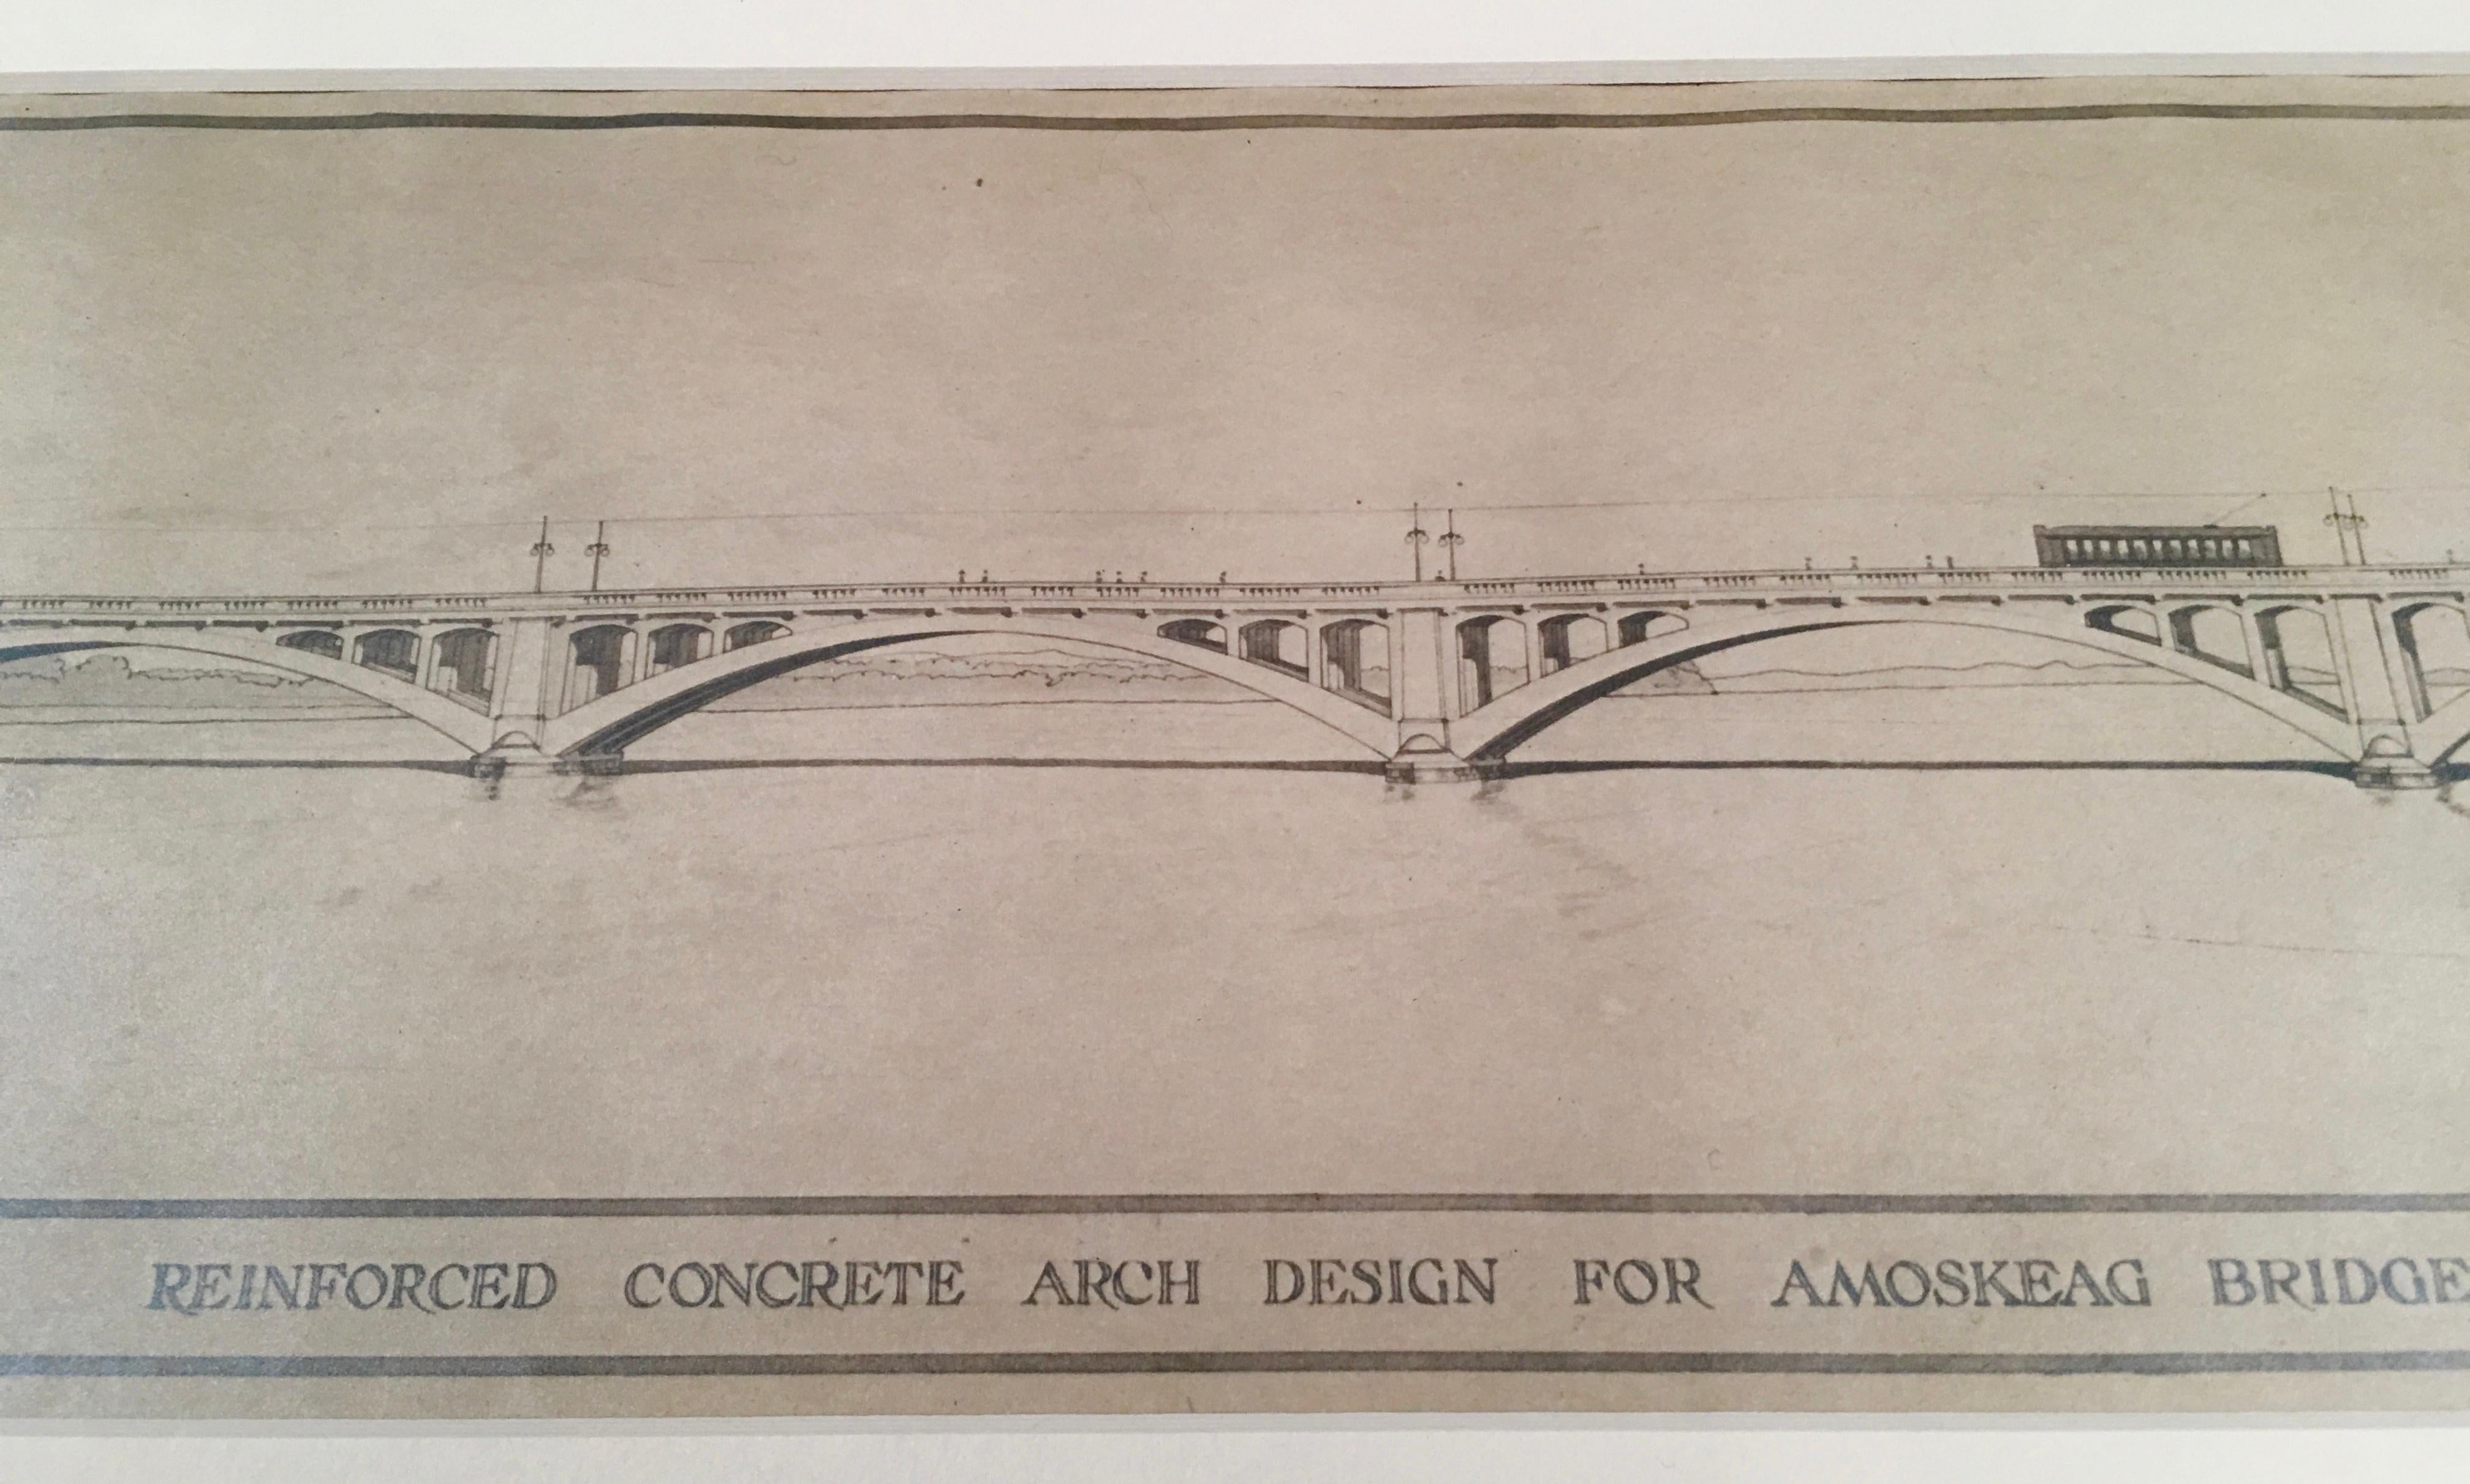 A finely rendered architectural pencil drawing of the Amoskeag Bridge, Manchester, New Hampshire, American, circa 1920. The bridge is beautifully and very precisely delineated, with light posts and an electric tram crossing it and a train locomotive